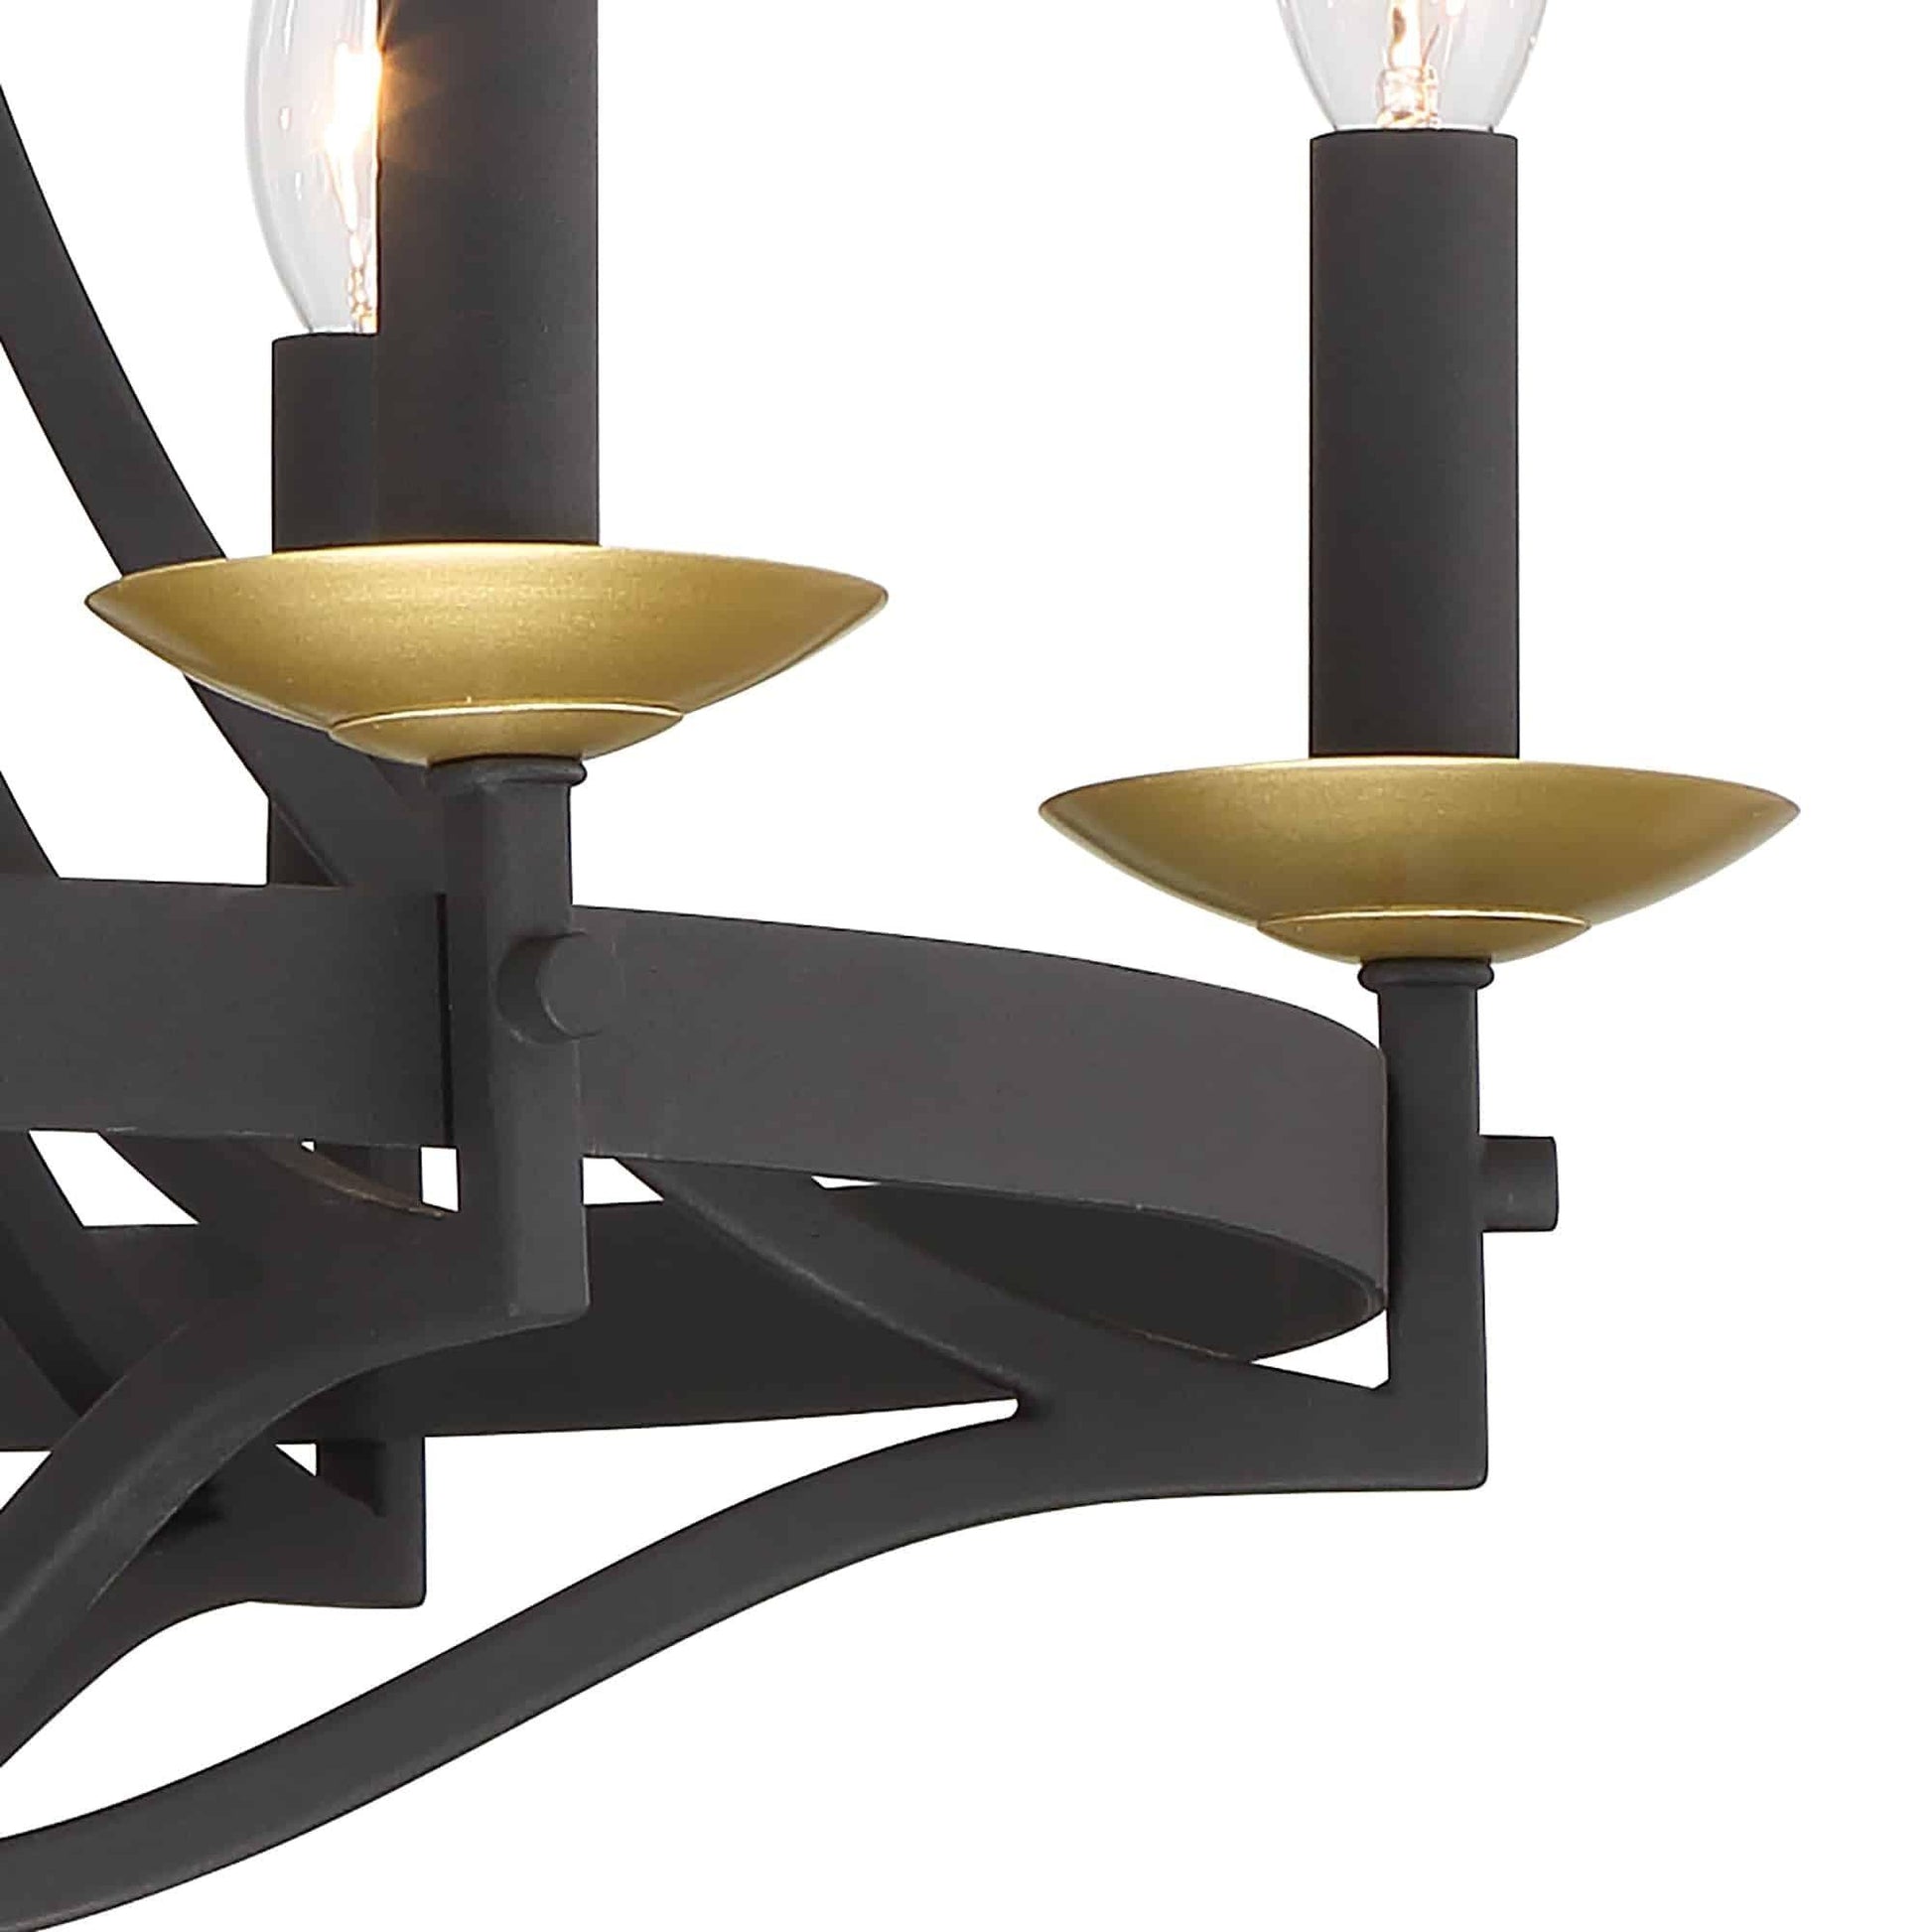 6 light candle style empire entryway chandelier (7) by ACROMA